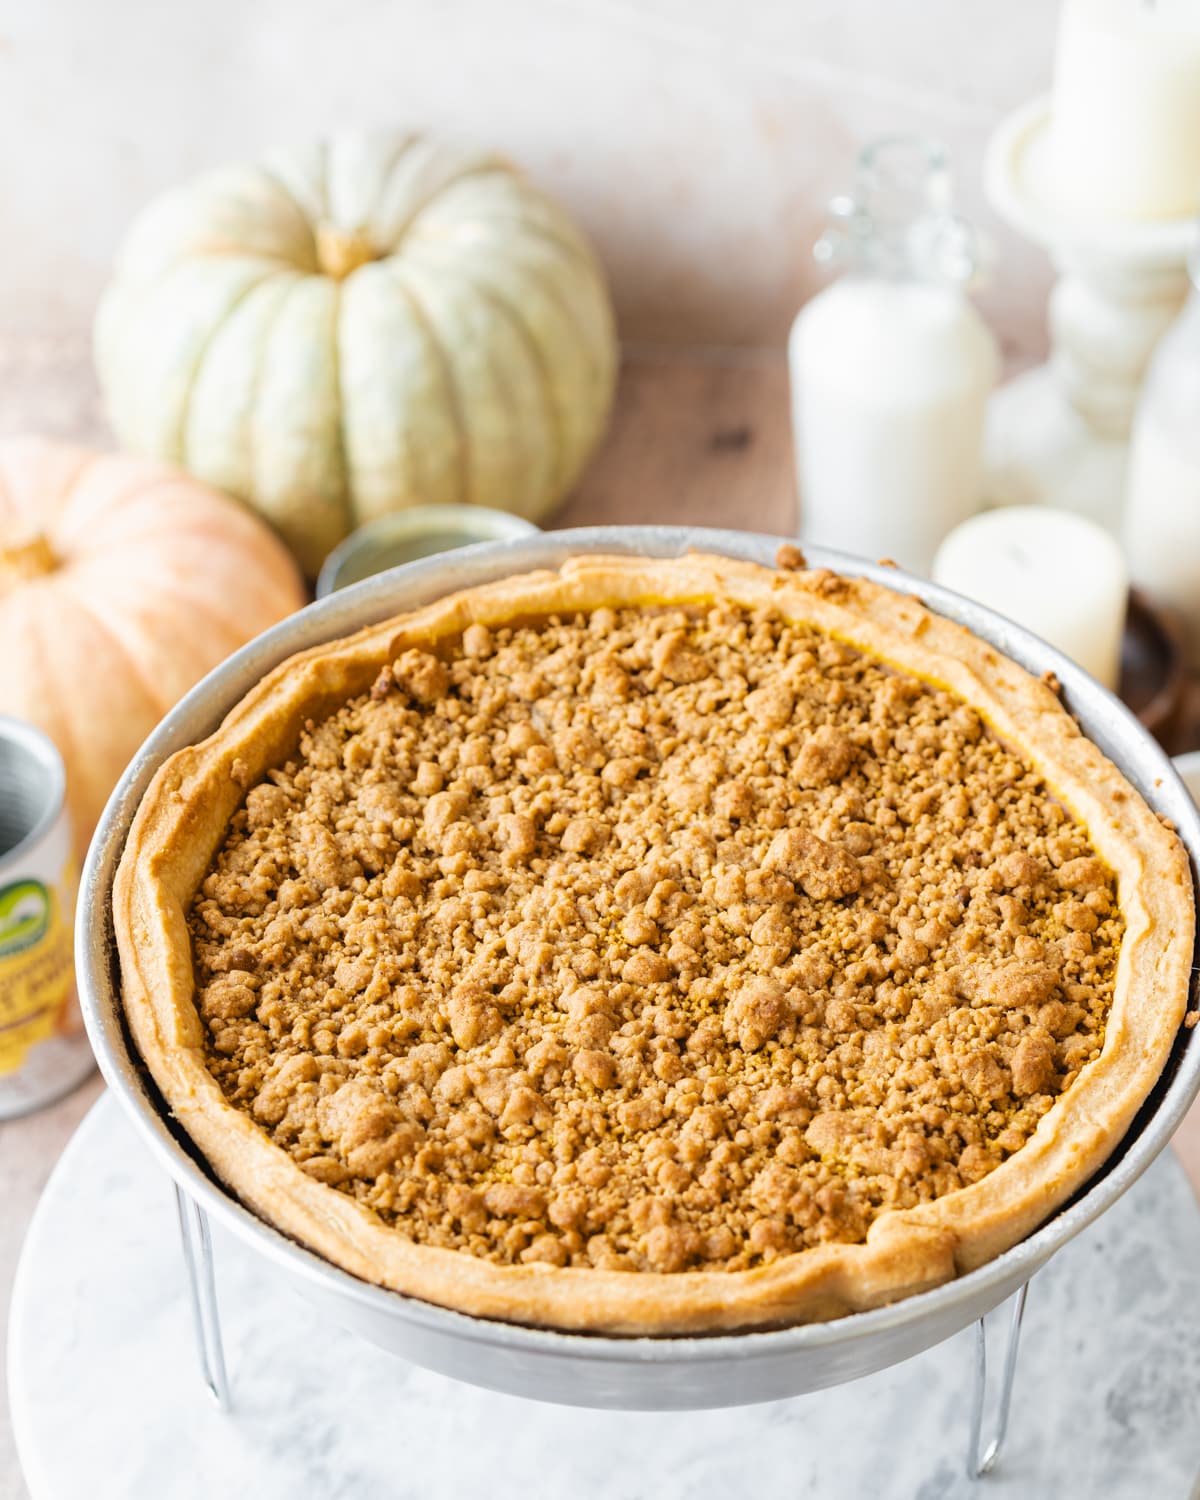 pumpkin pie with crumble topping and pumpkins in the background.